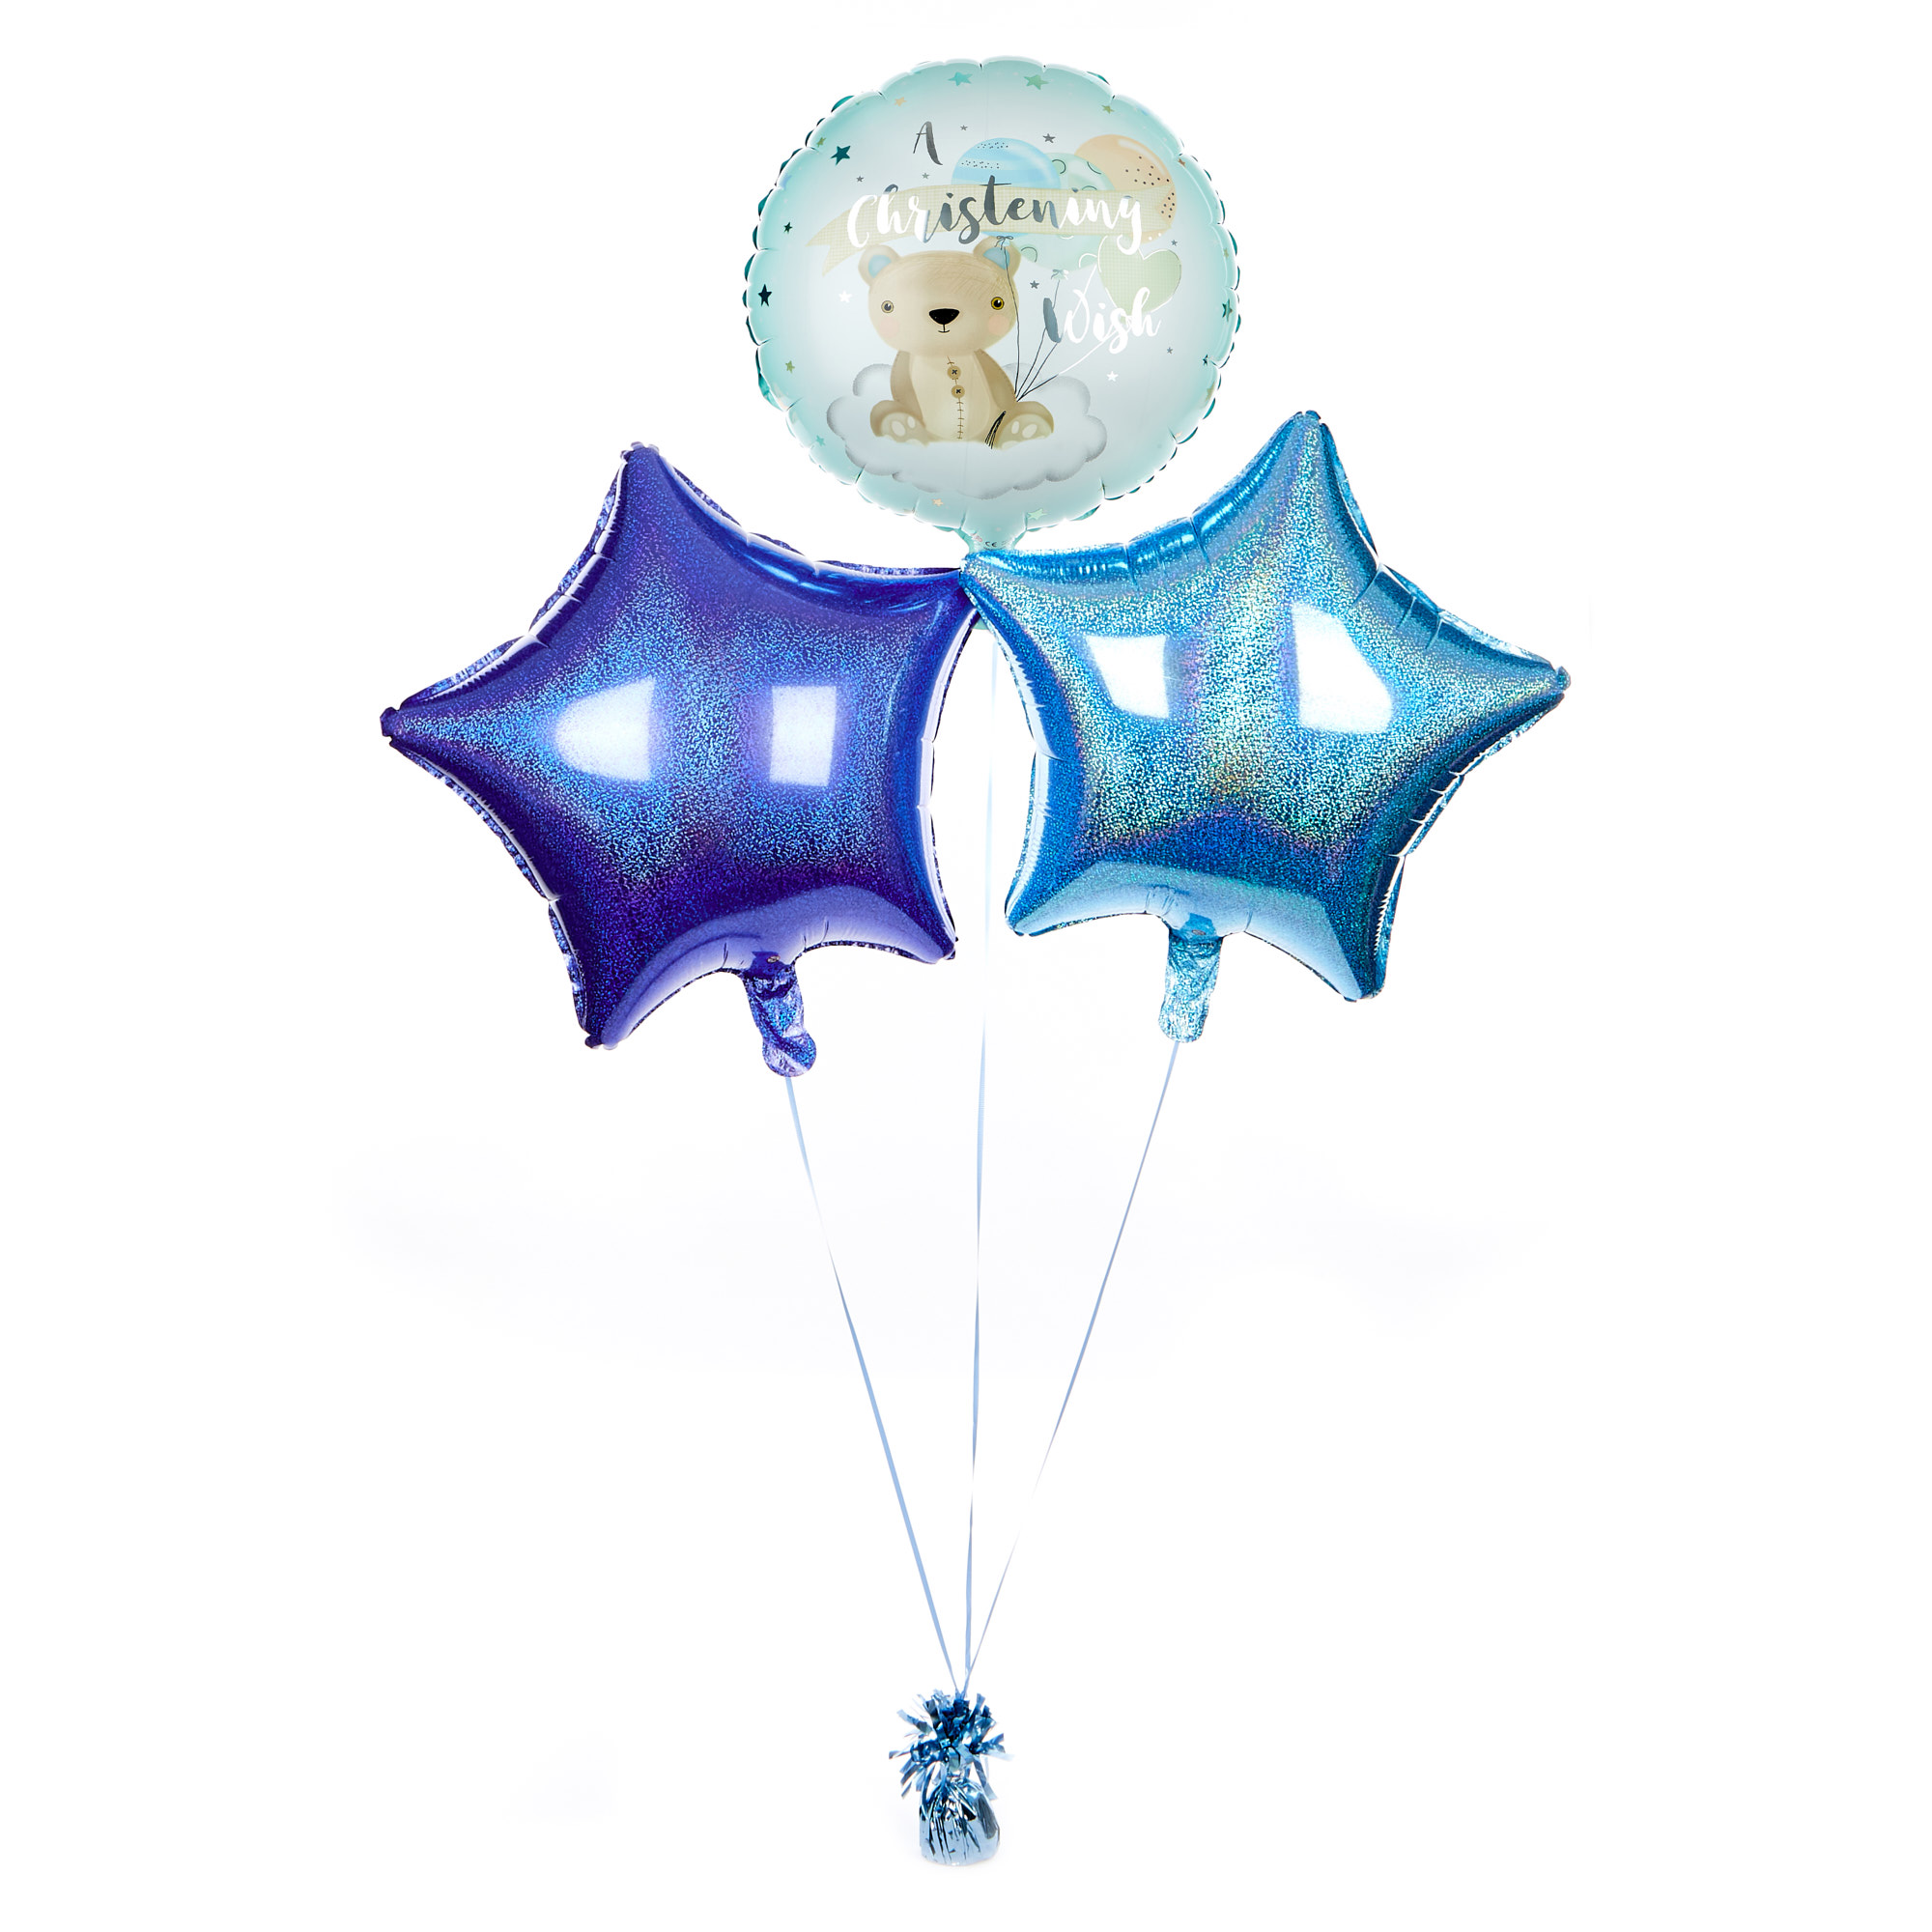 Blue Christening Wish Balloon Bouquet - DELIVERED INFLATED!